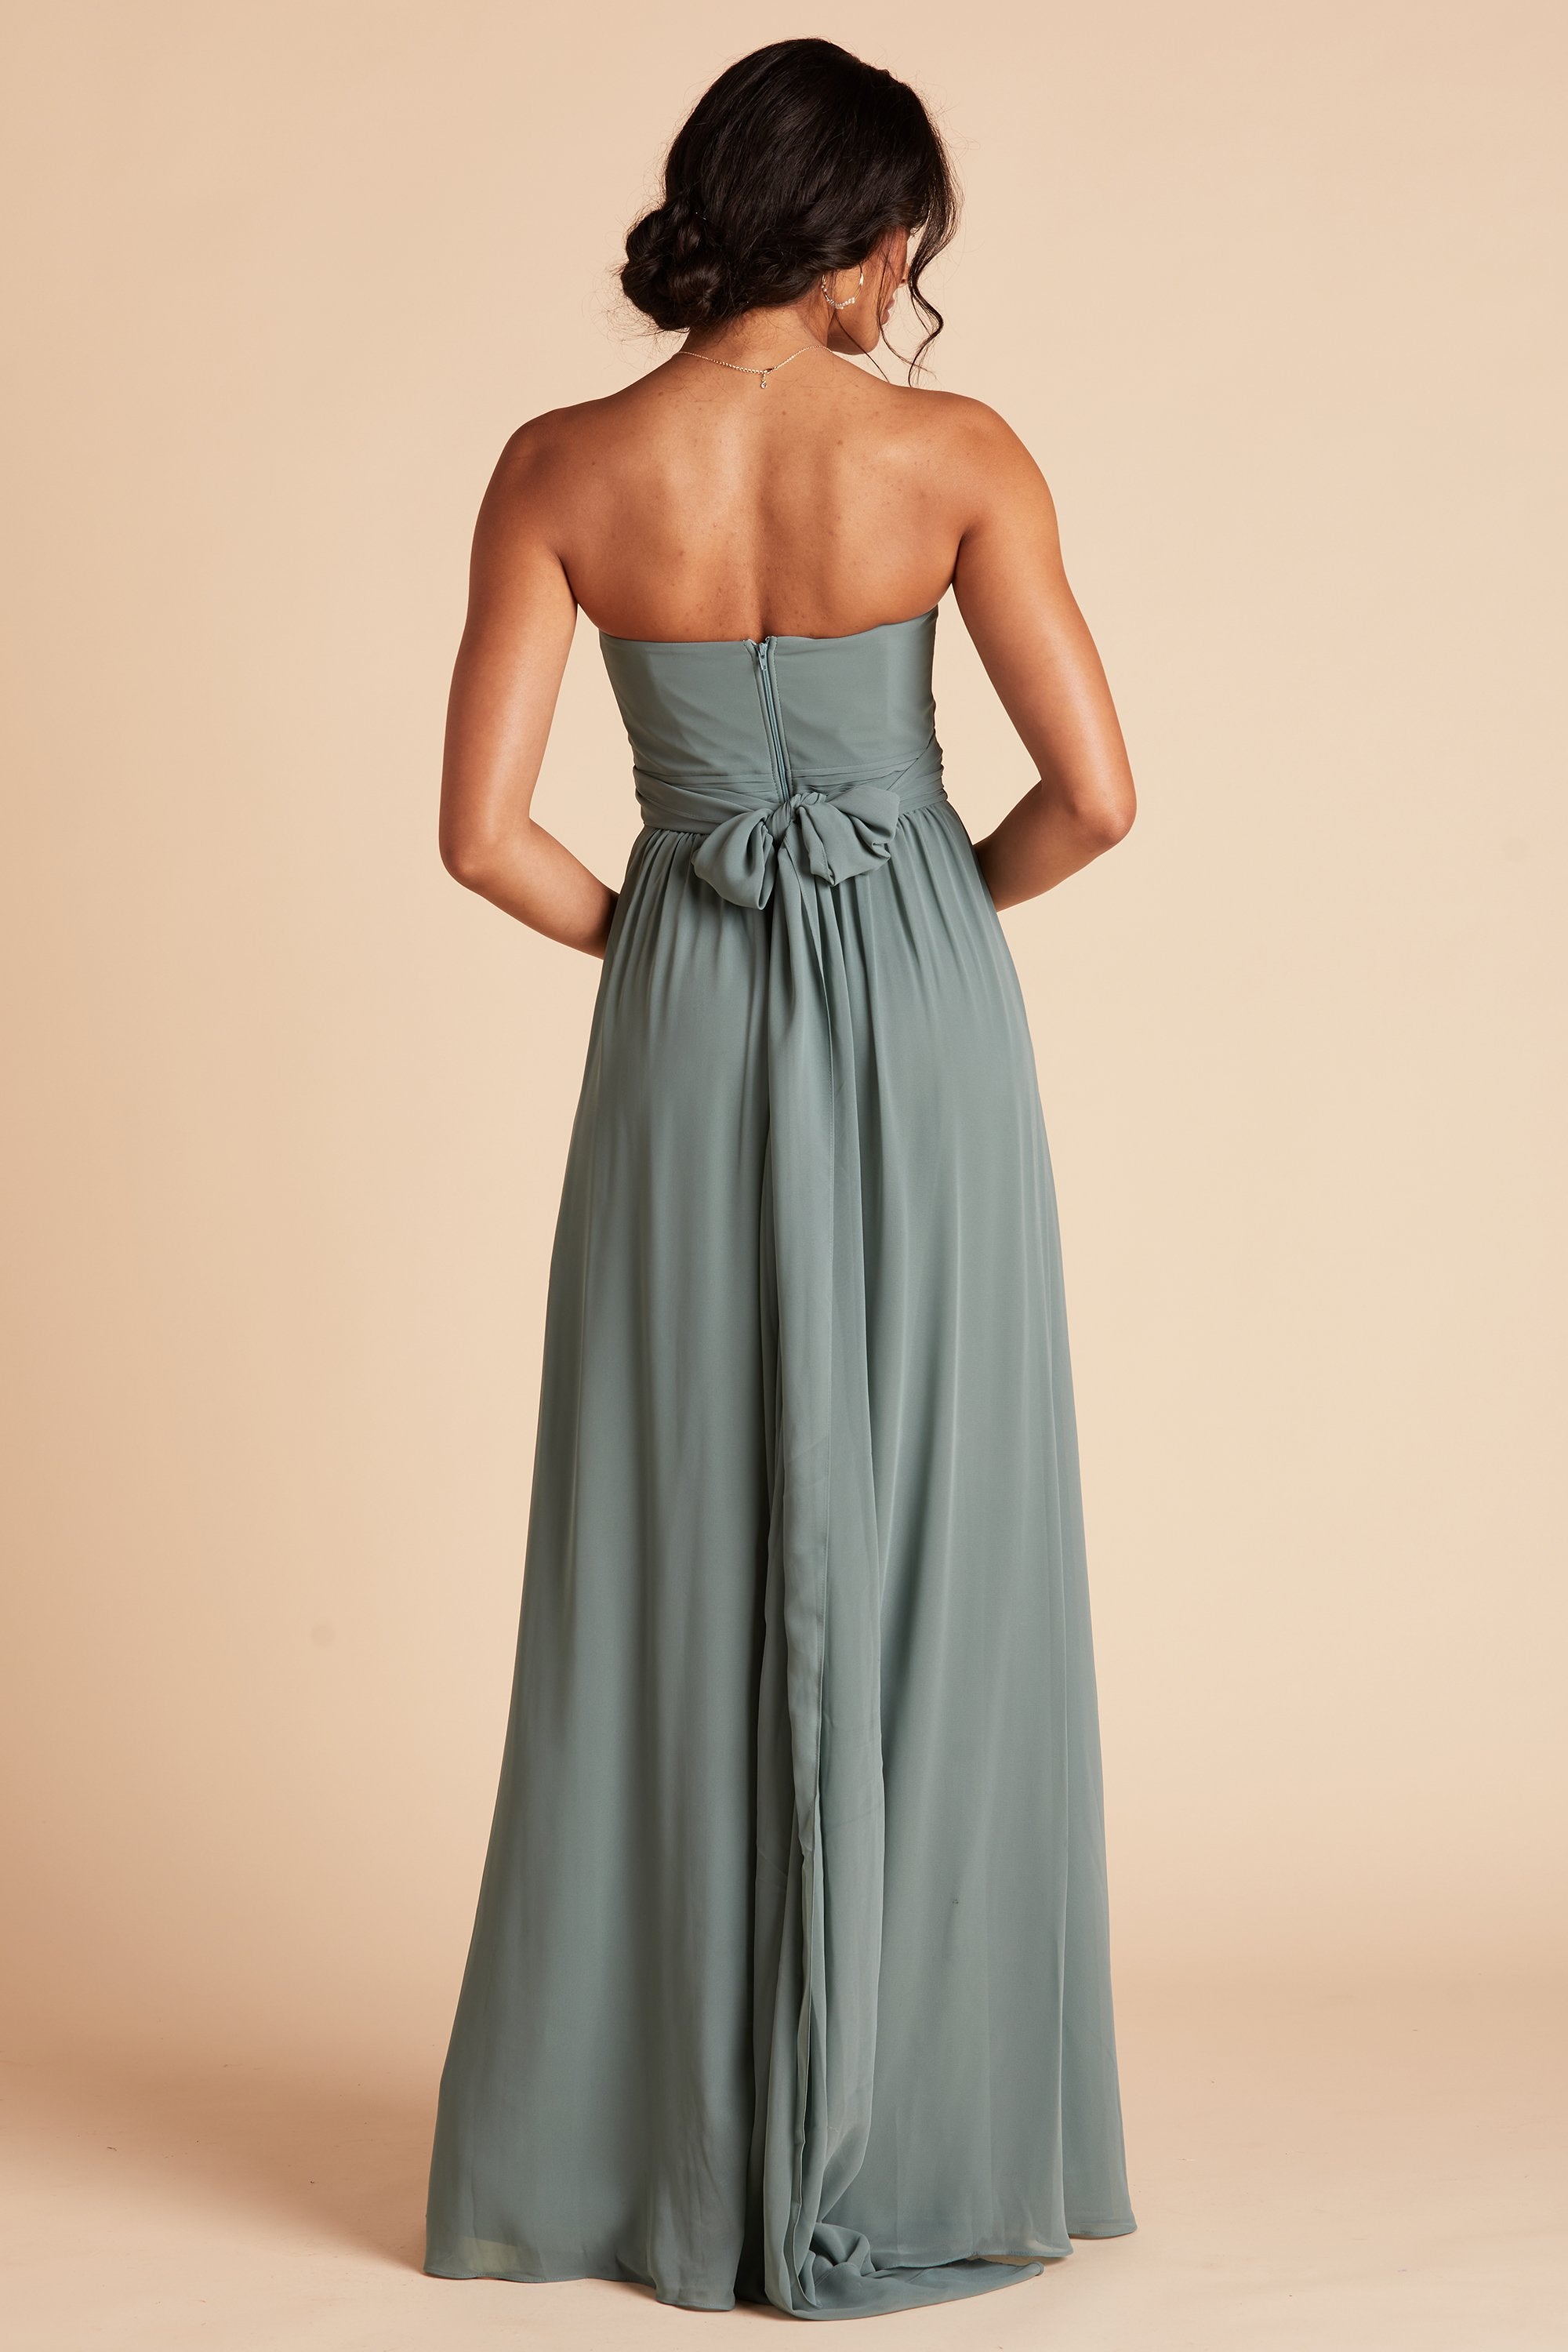 Back view of the Grace Convertible Bridesmaid Dress in sea glass chiffon reveals an open back cut below the shoulder blades with front streamers tied around the waist in a delicate and flowing bow.